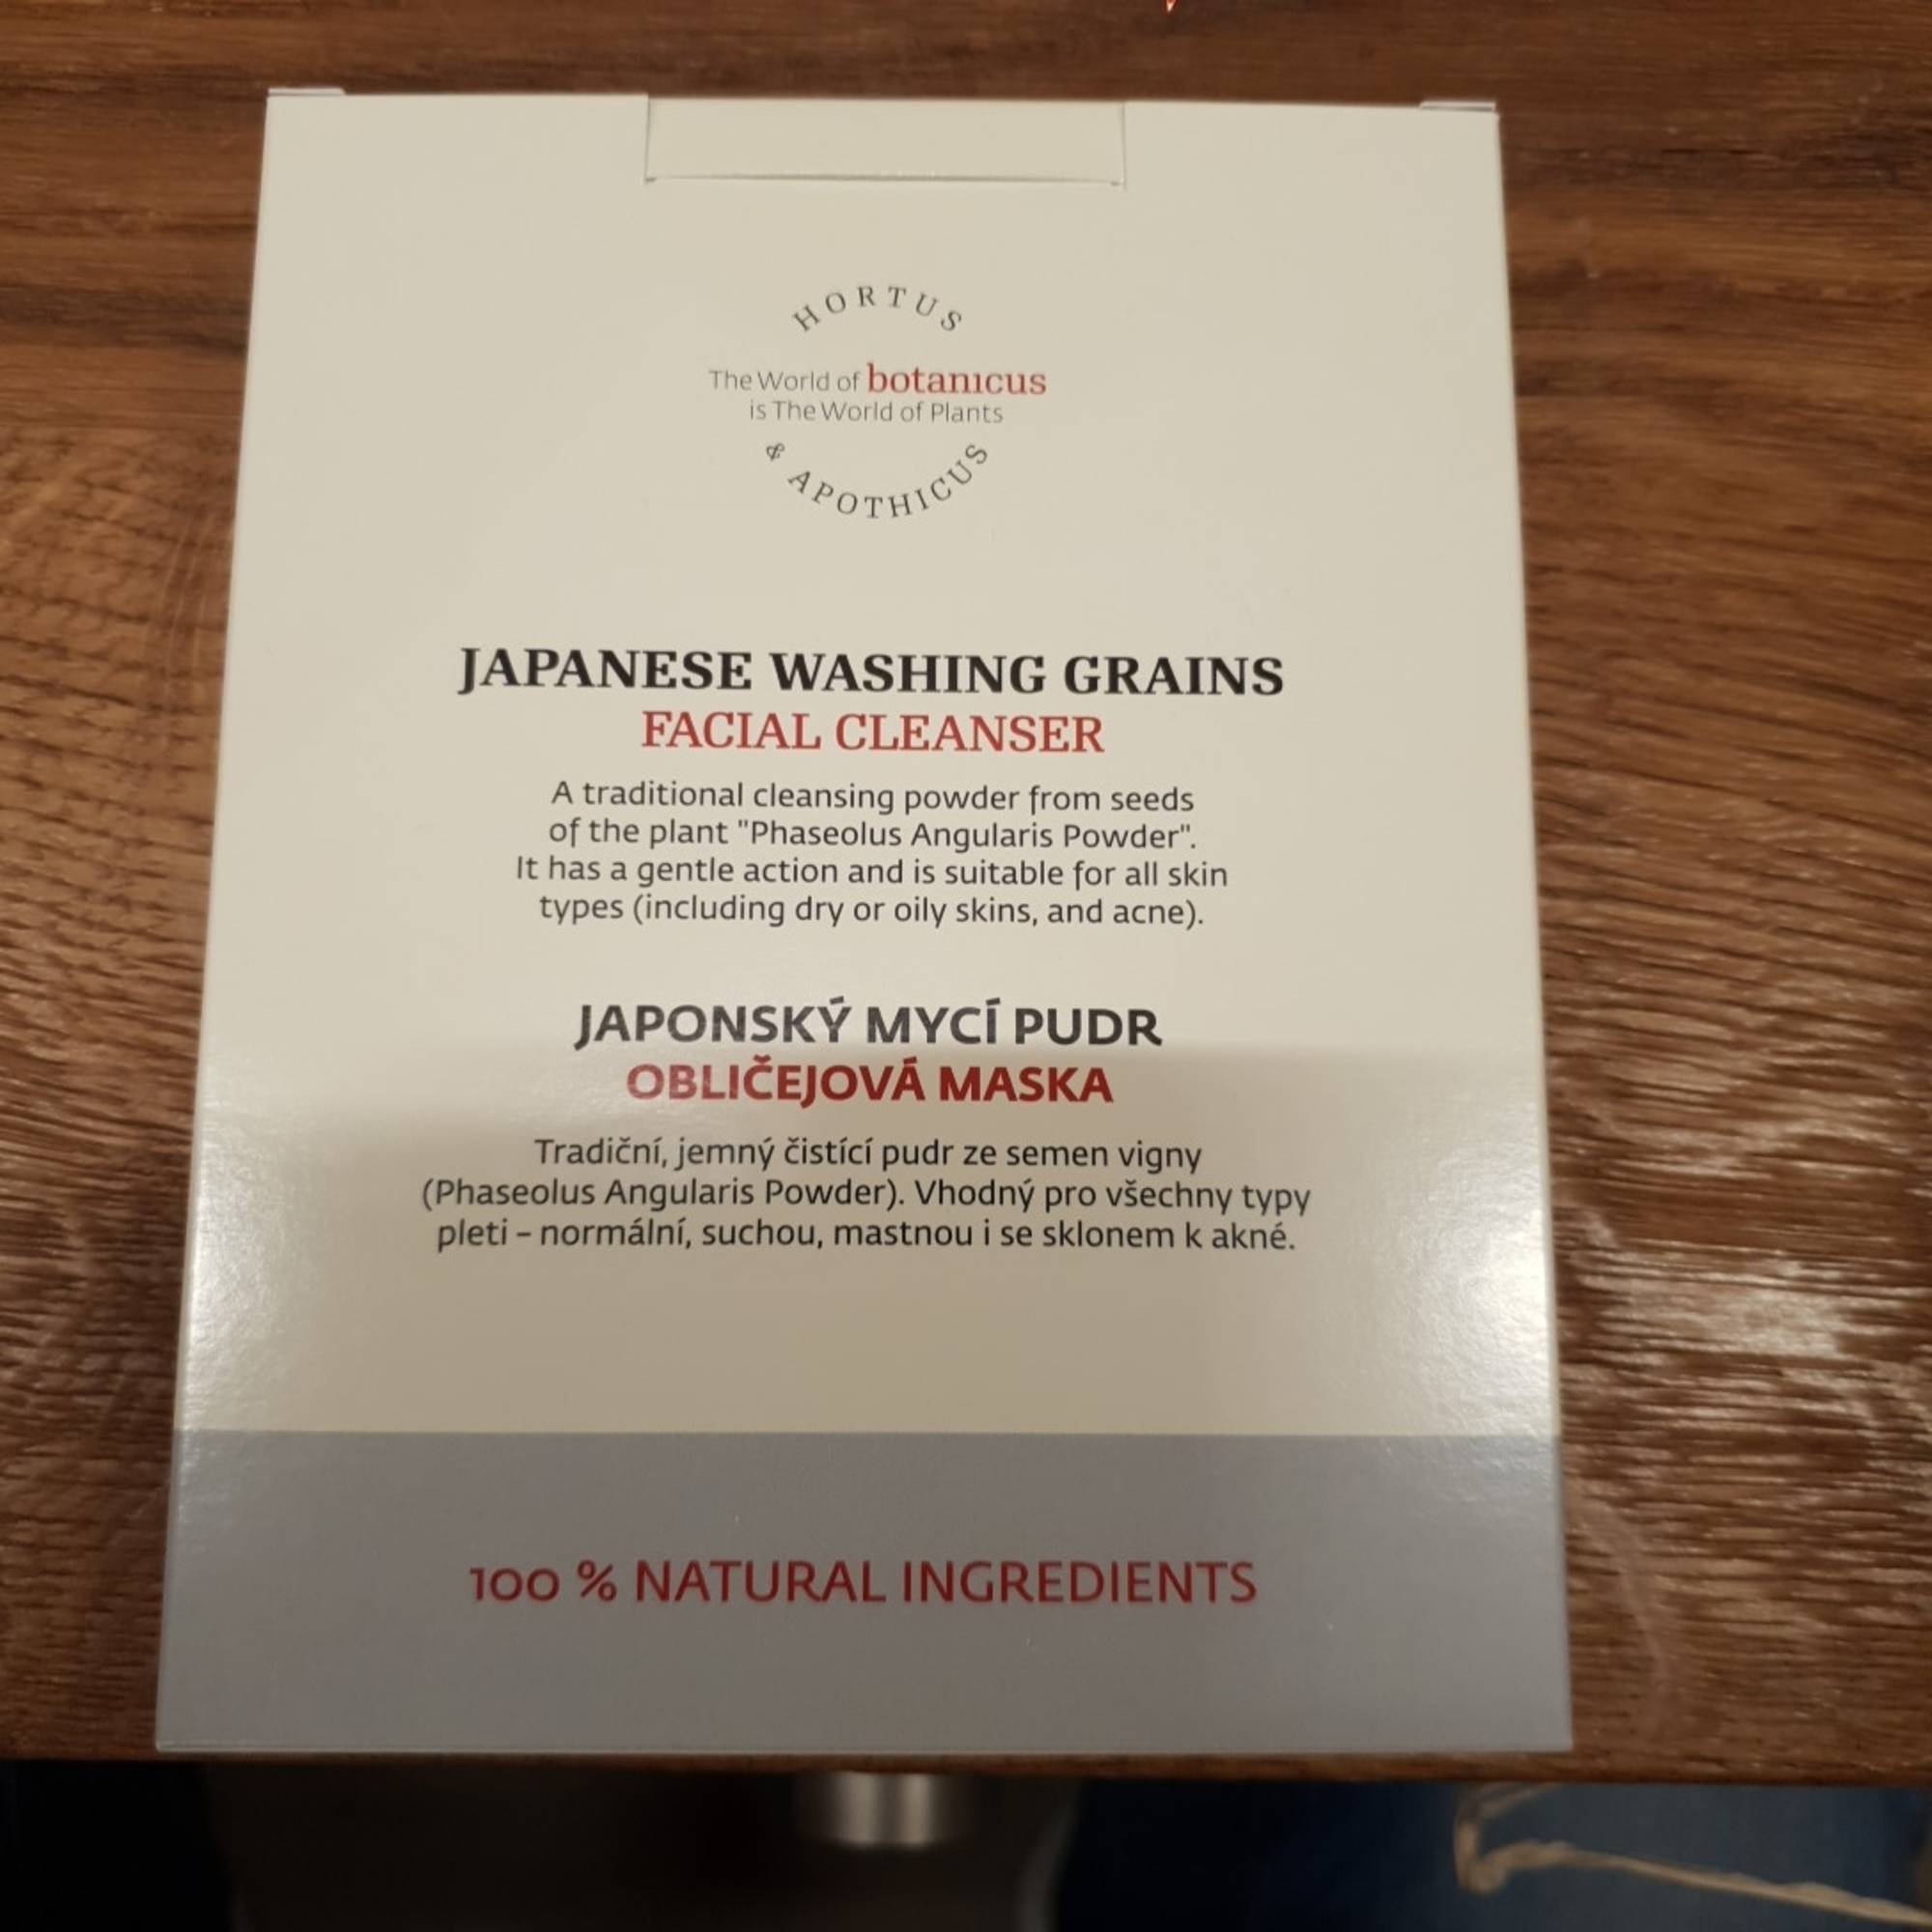 HORTUS & APOTHICUS - Japanese washing grains - Facial cleanser